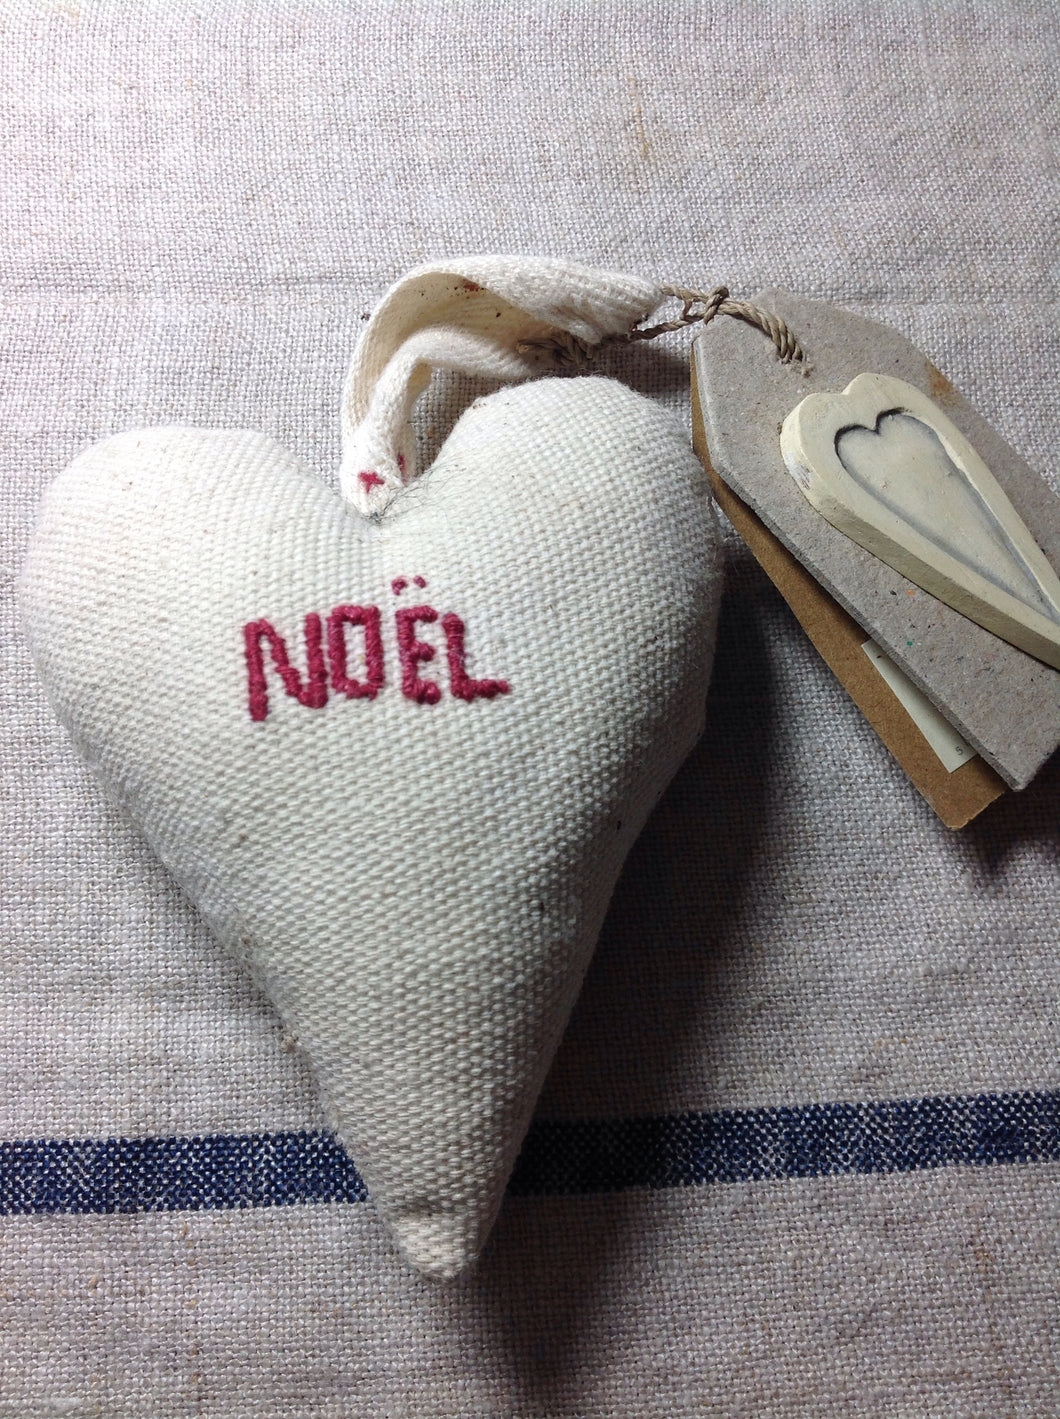 Cream hanging Christmas decoration heart with Noel embroidered on the front.